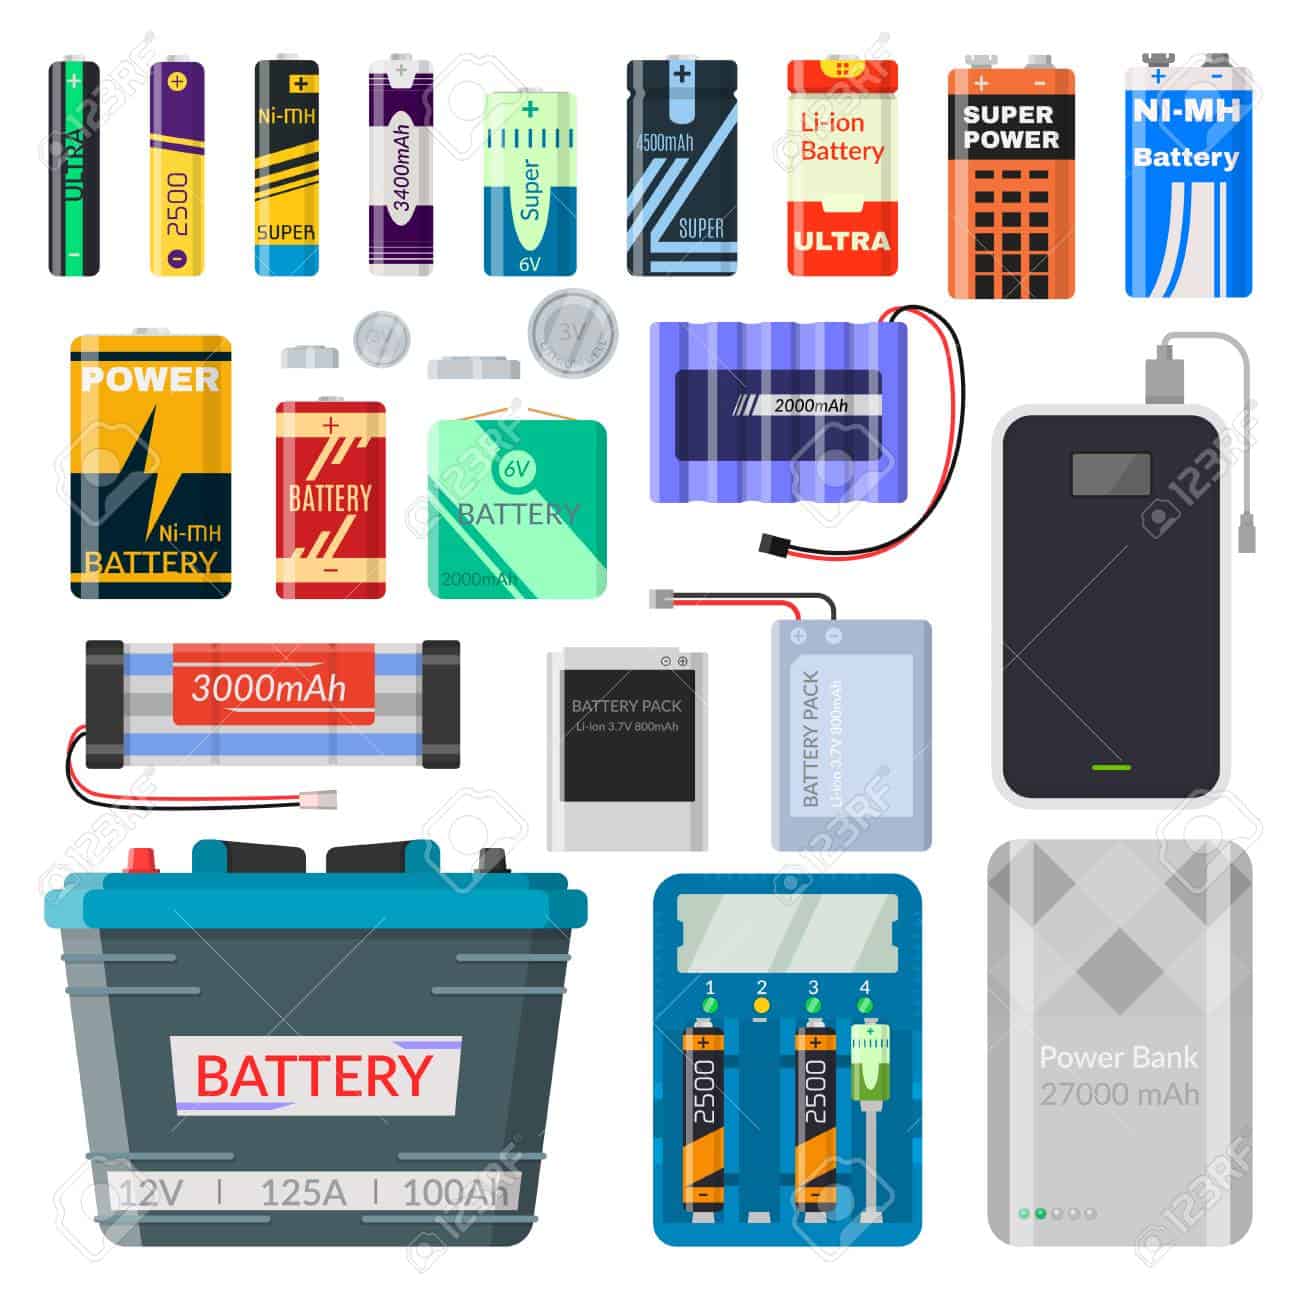 Different types of Batteries - thetechpapa.com